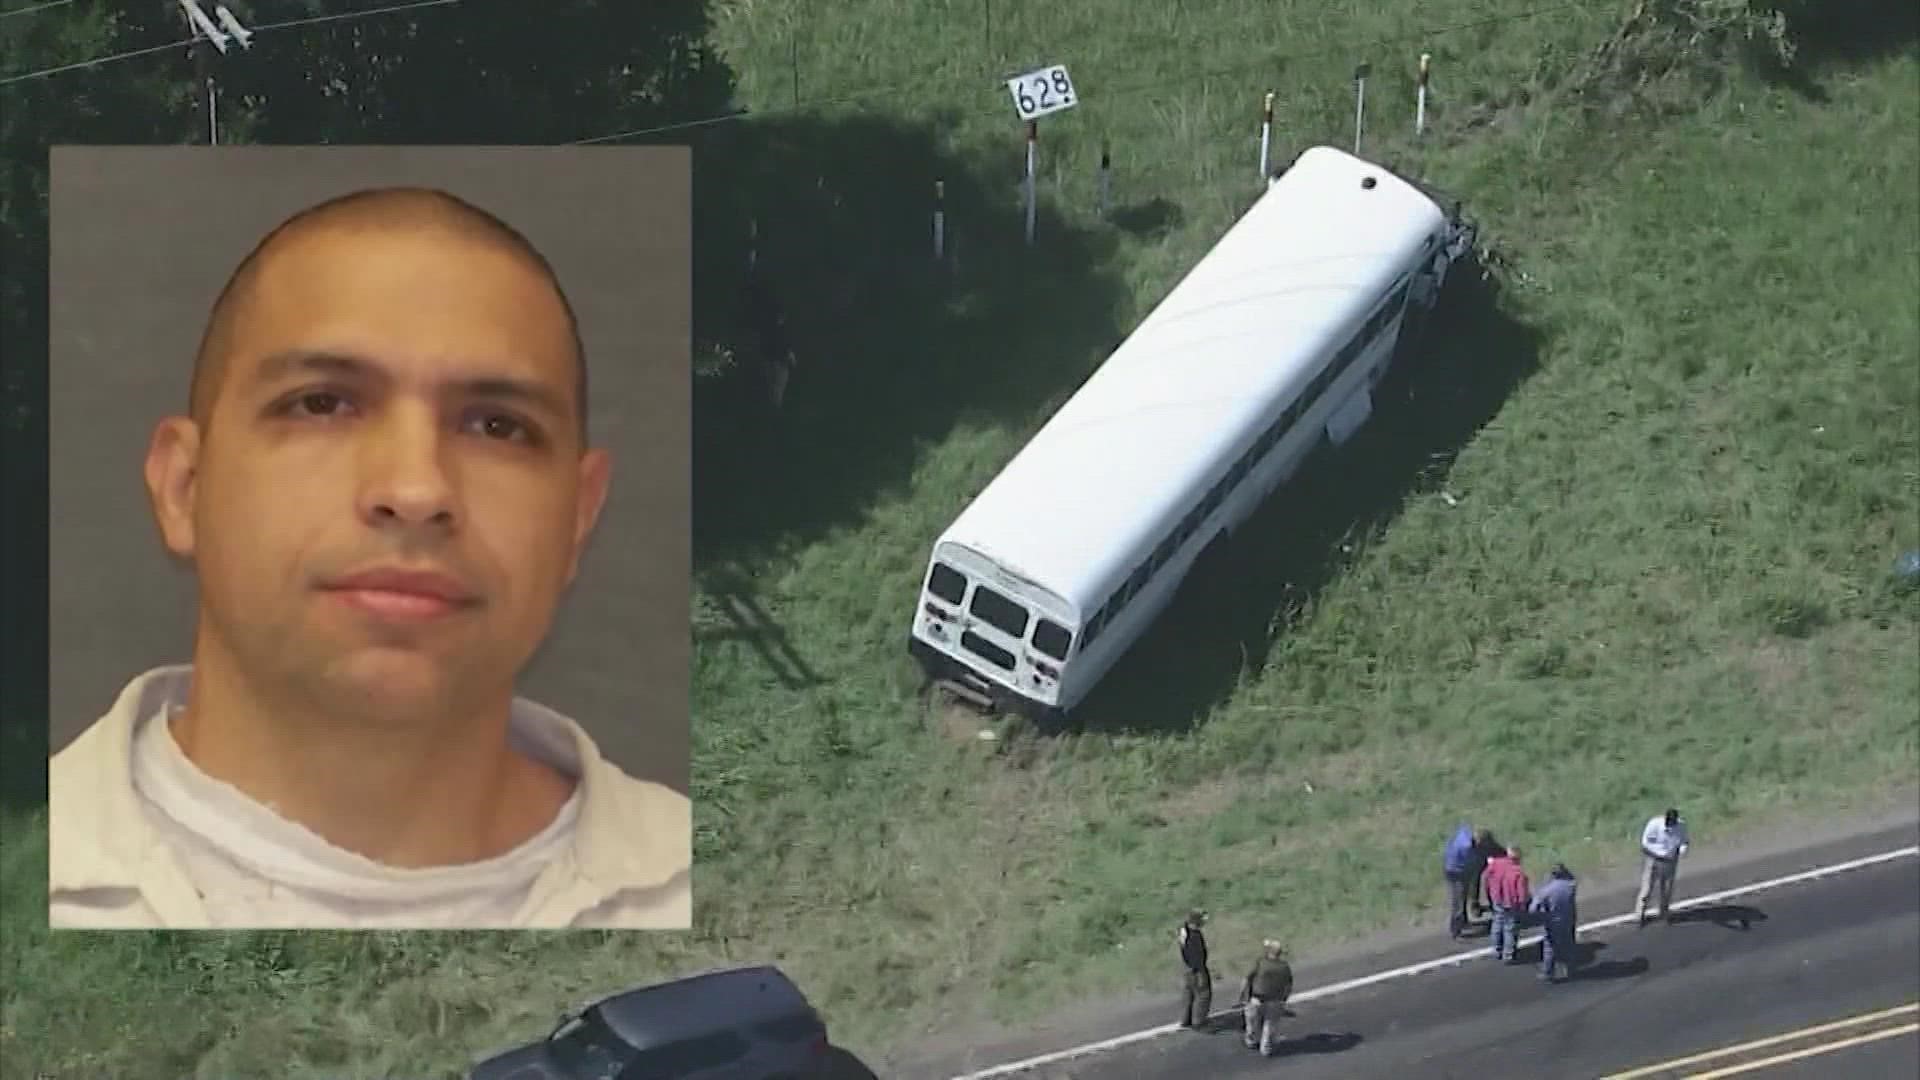 State Sen. John Whitmire said he called for inmate transports to stop until a full investigation surrounding Gonzalo Lopez's escape is complete